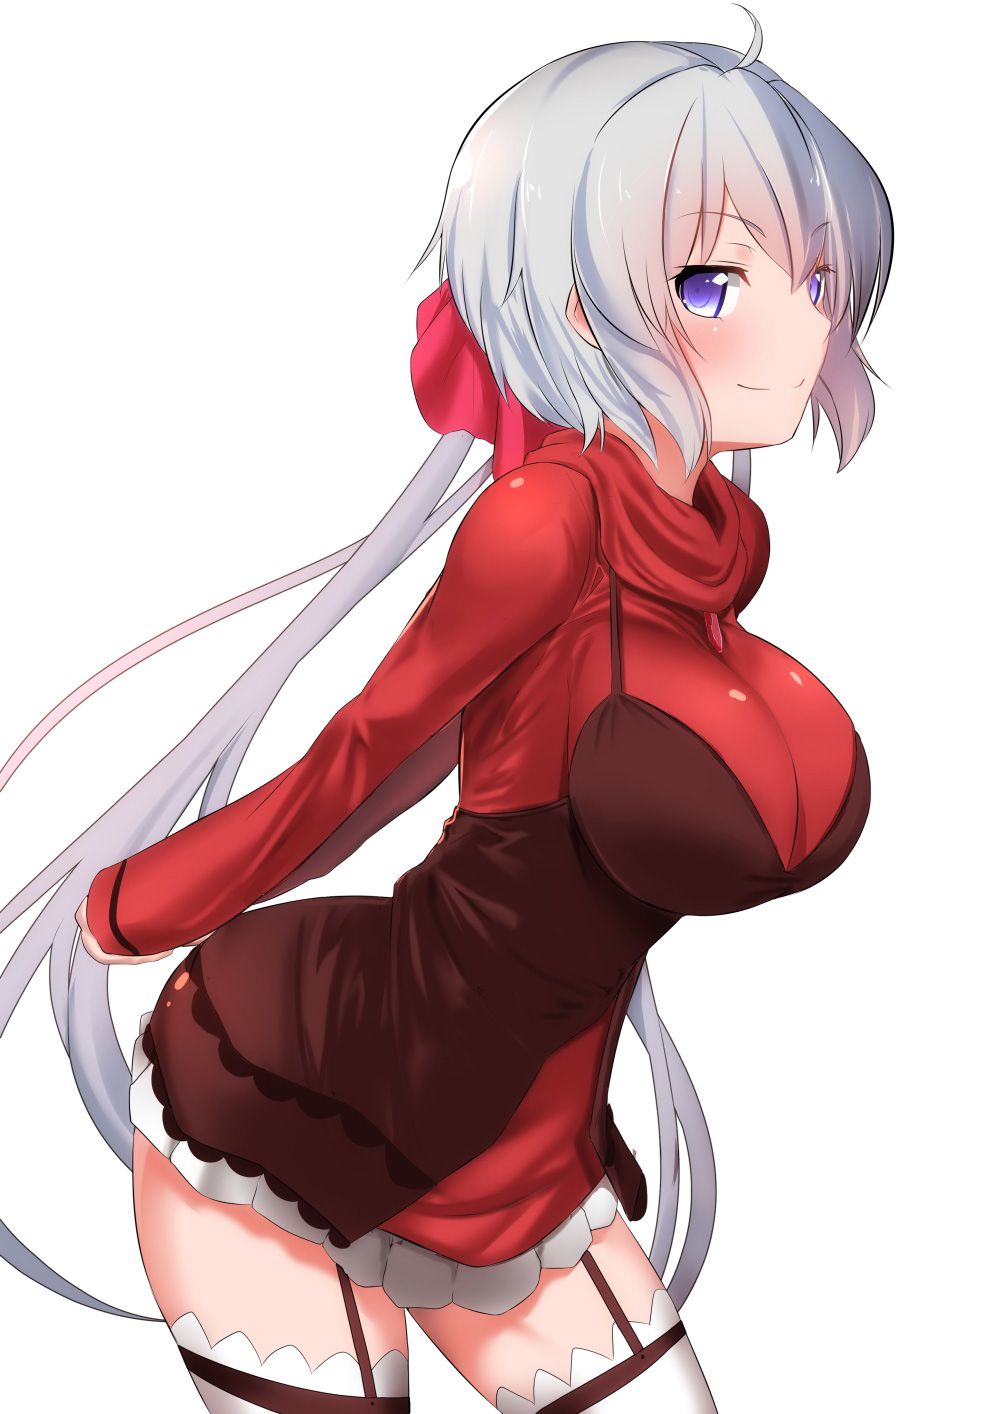 Secondary image of a silver-haired girl that 4 50 photos [Ero/non-erotic] 19